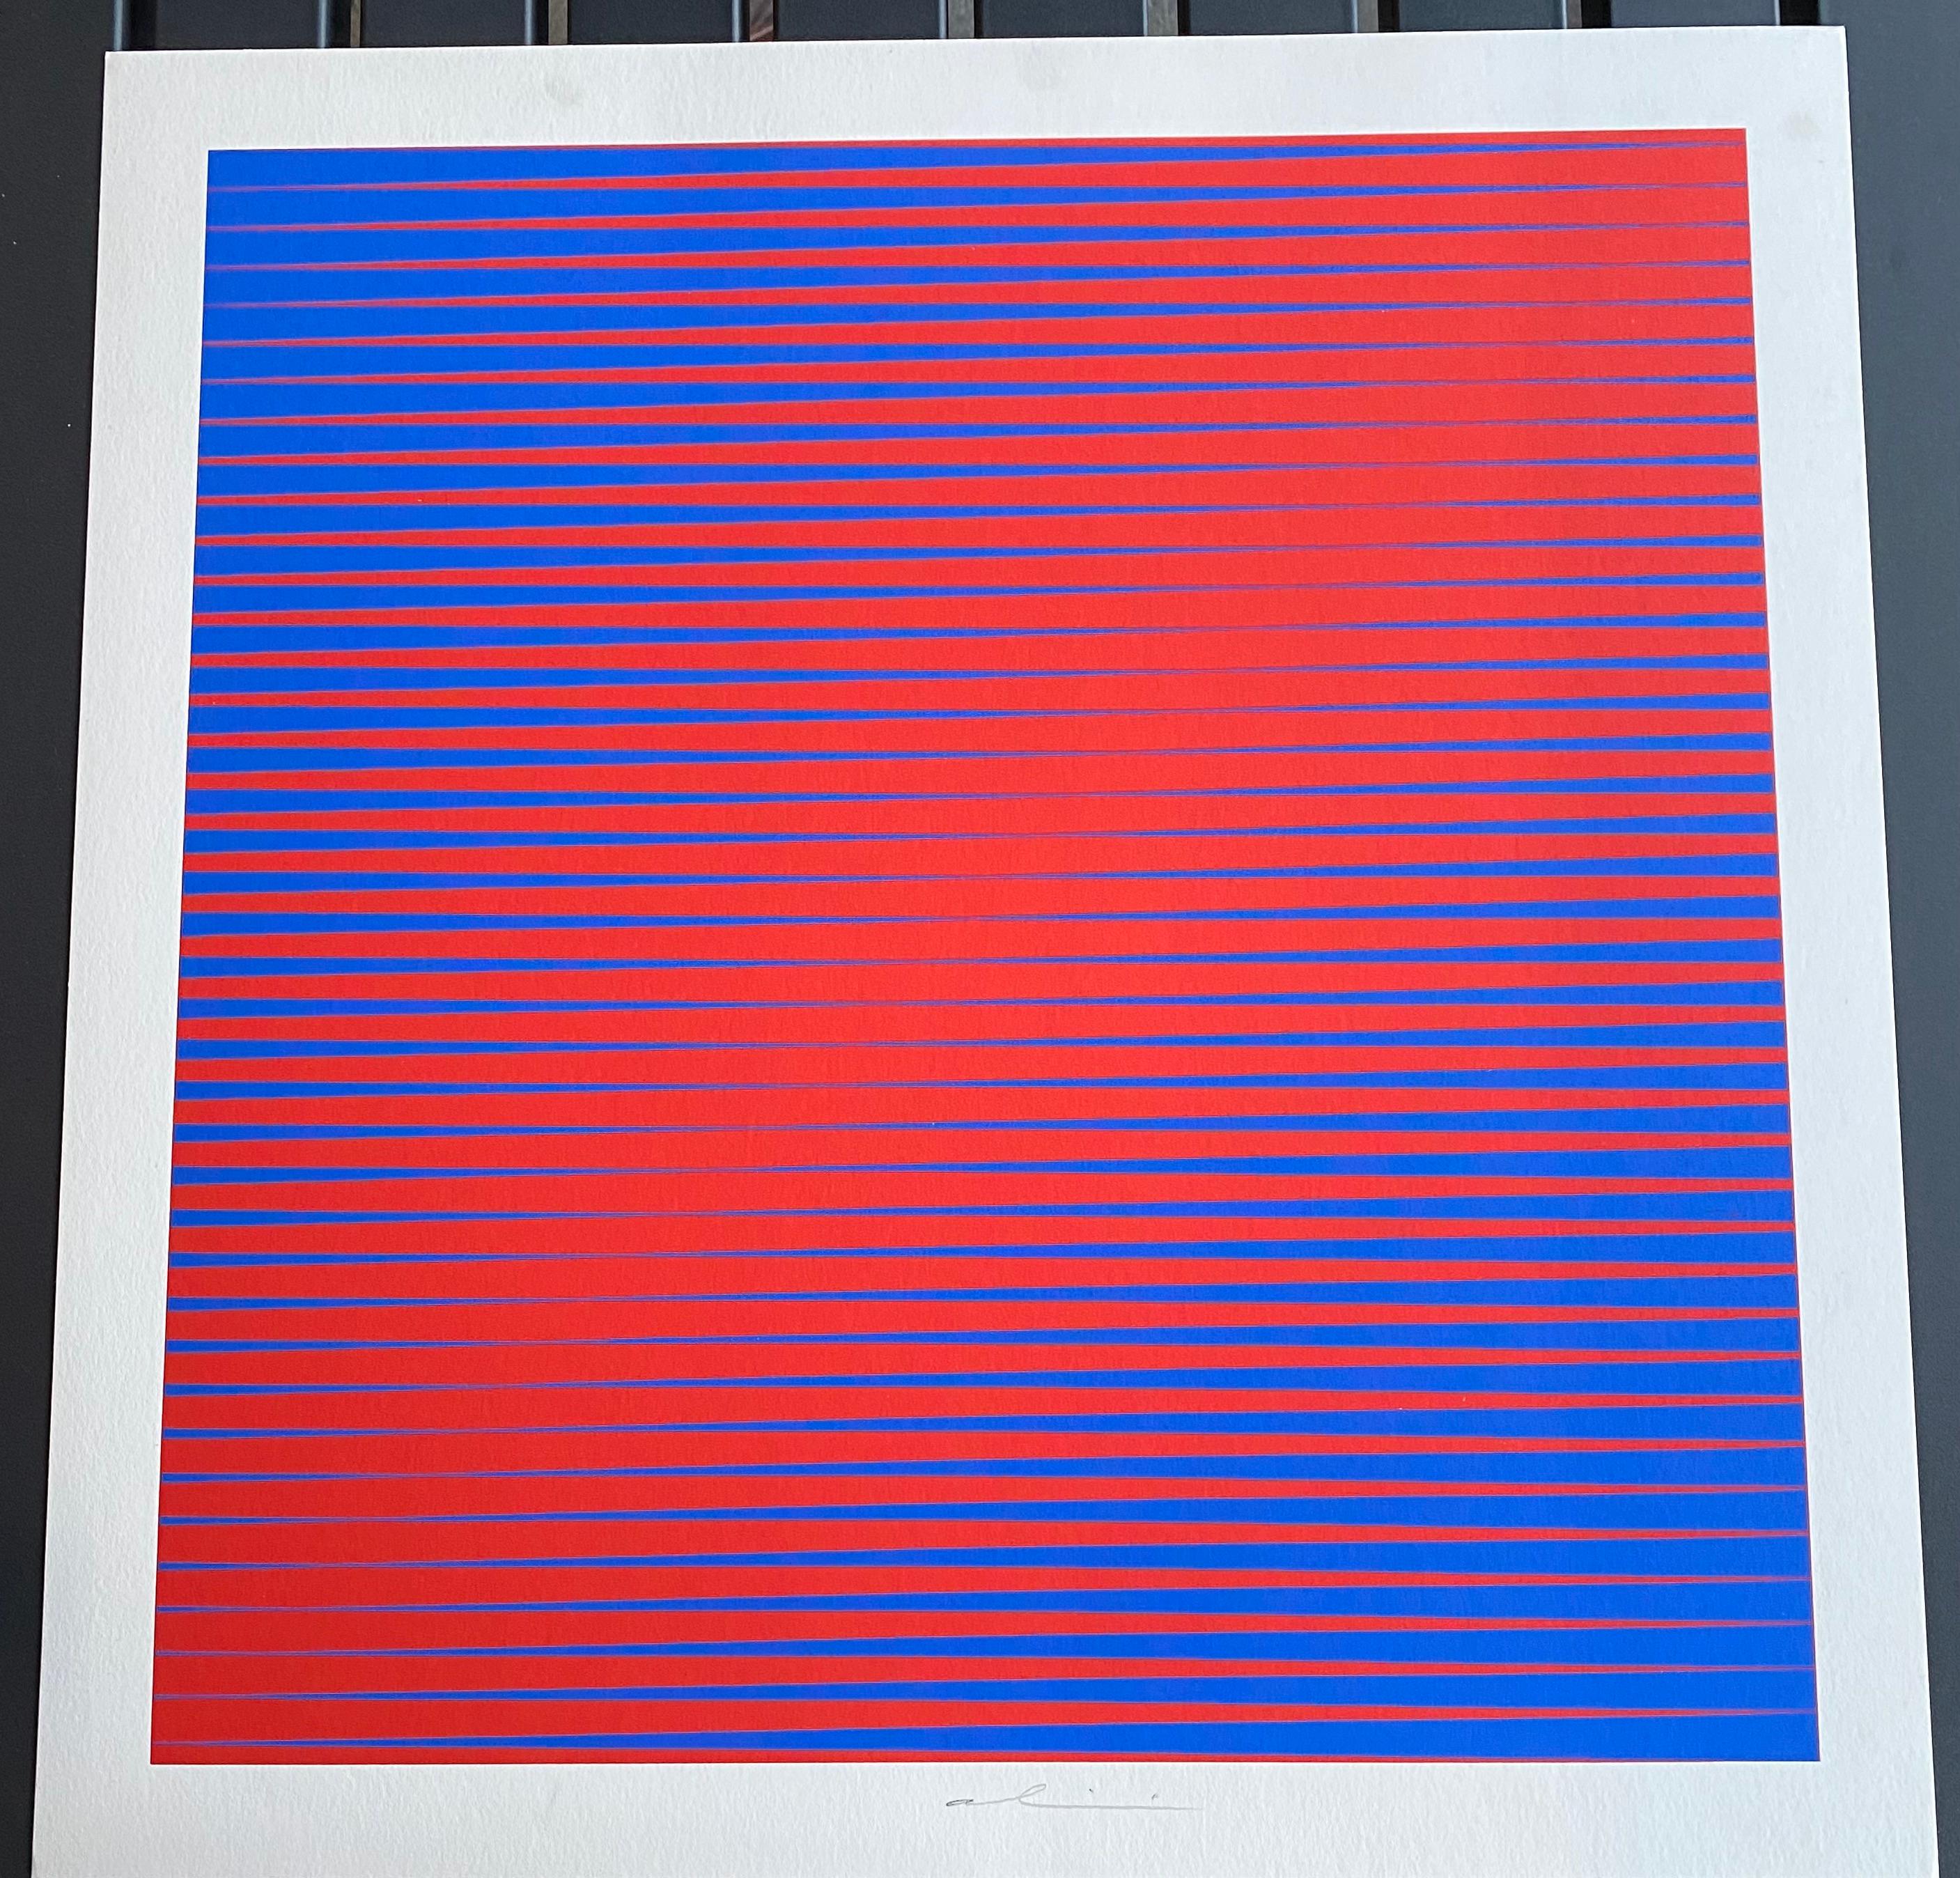 Screenprint in good condition by the Italian Op-Art artist Getulio Alviani.
Getulio Alviani (1939-2018) was an Italian painter, object artist and representative of Op Art or Kinetic Art. He created abstract works both in reduced black-and-white and